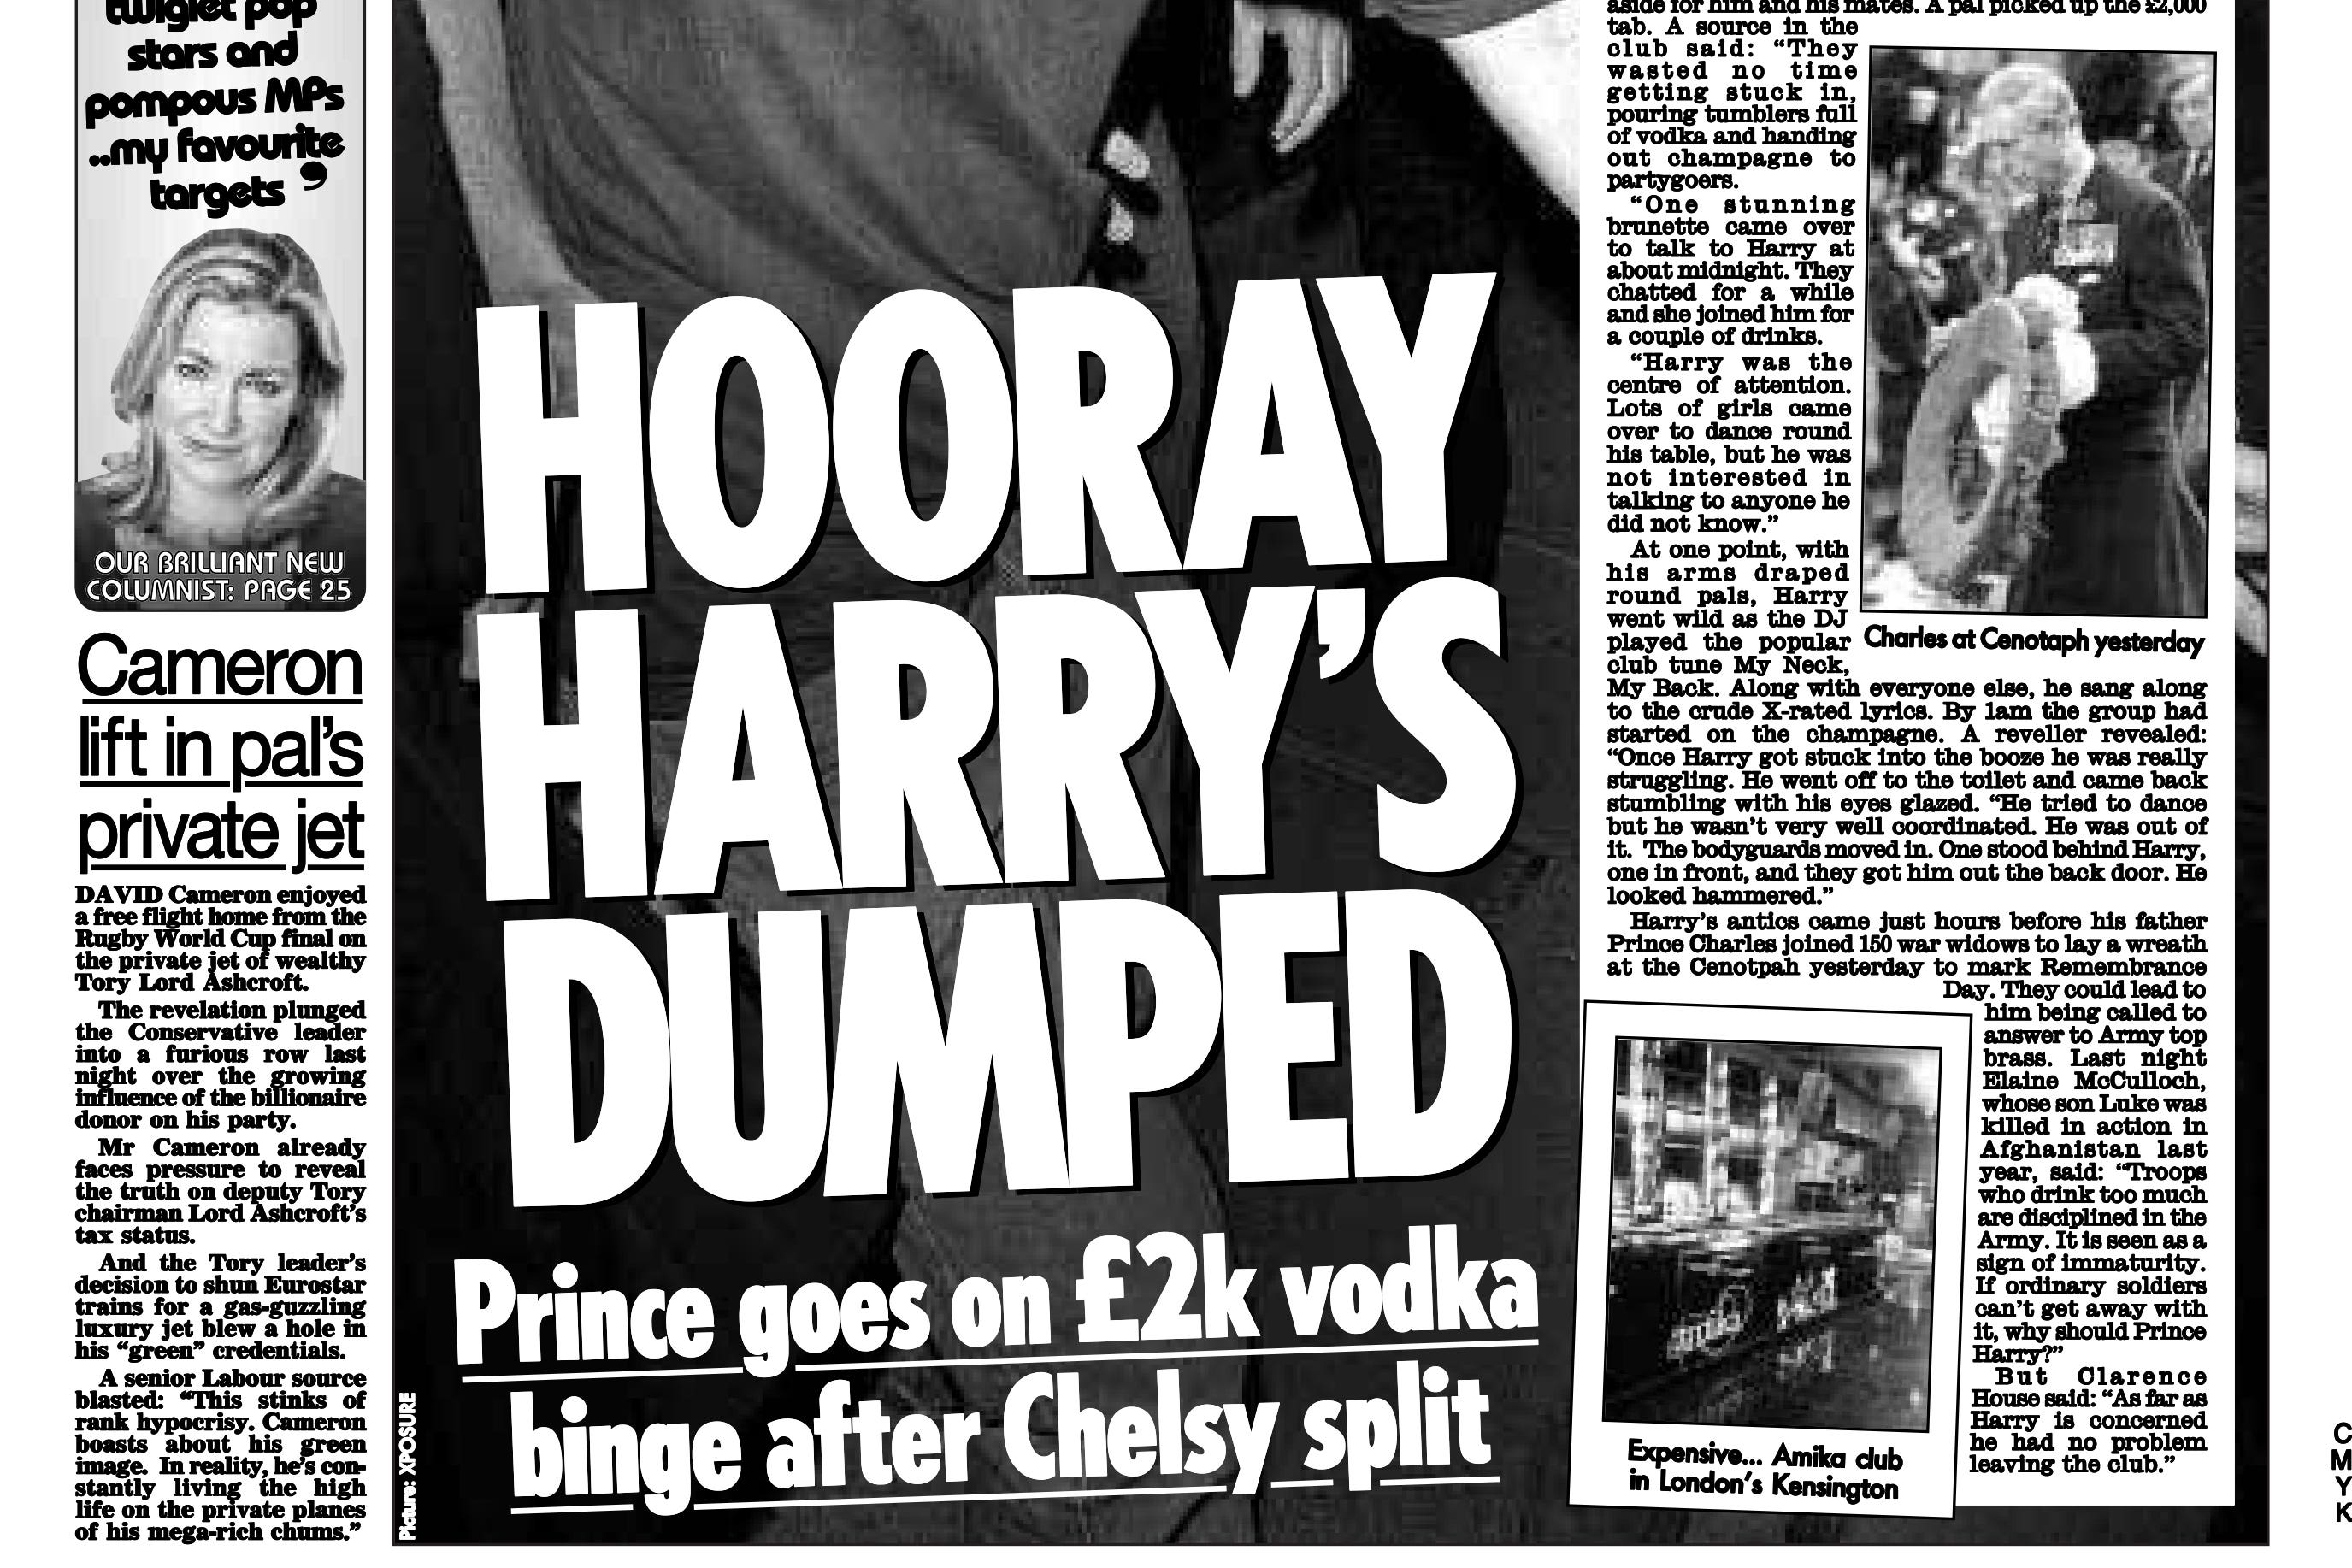 A newspaper article about the Duke of Sussex published in the Sunday Mirror in 2007